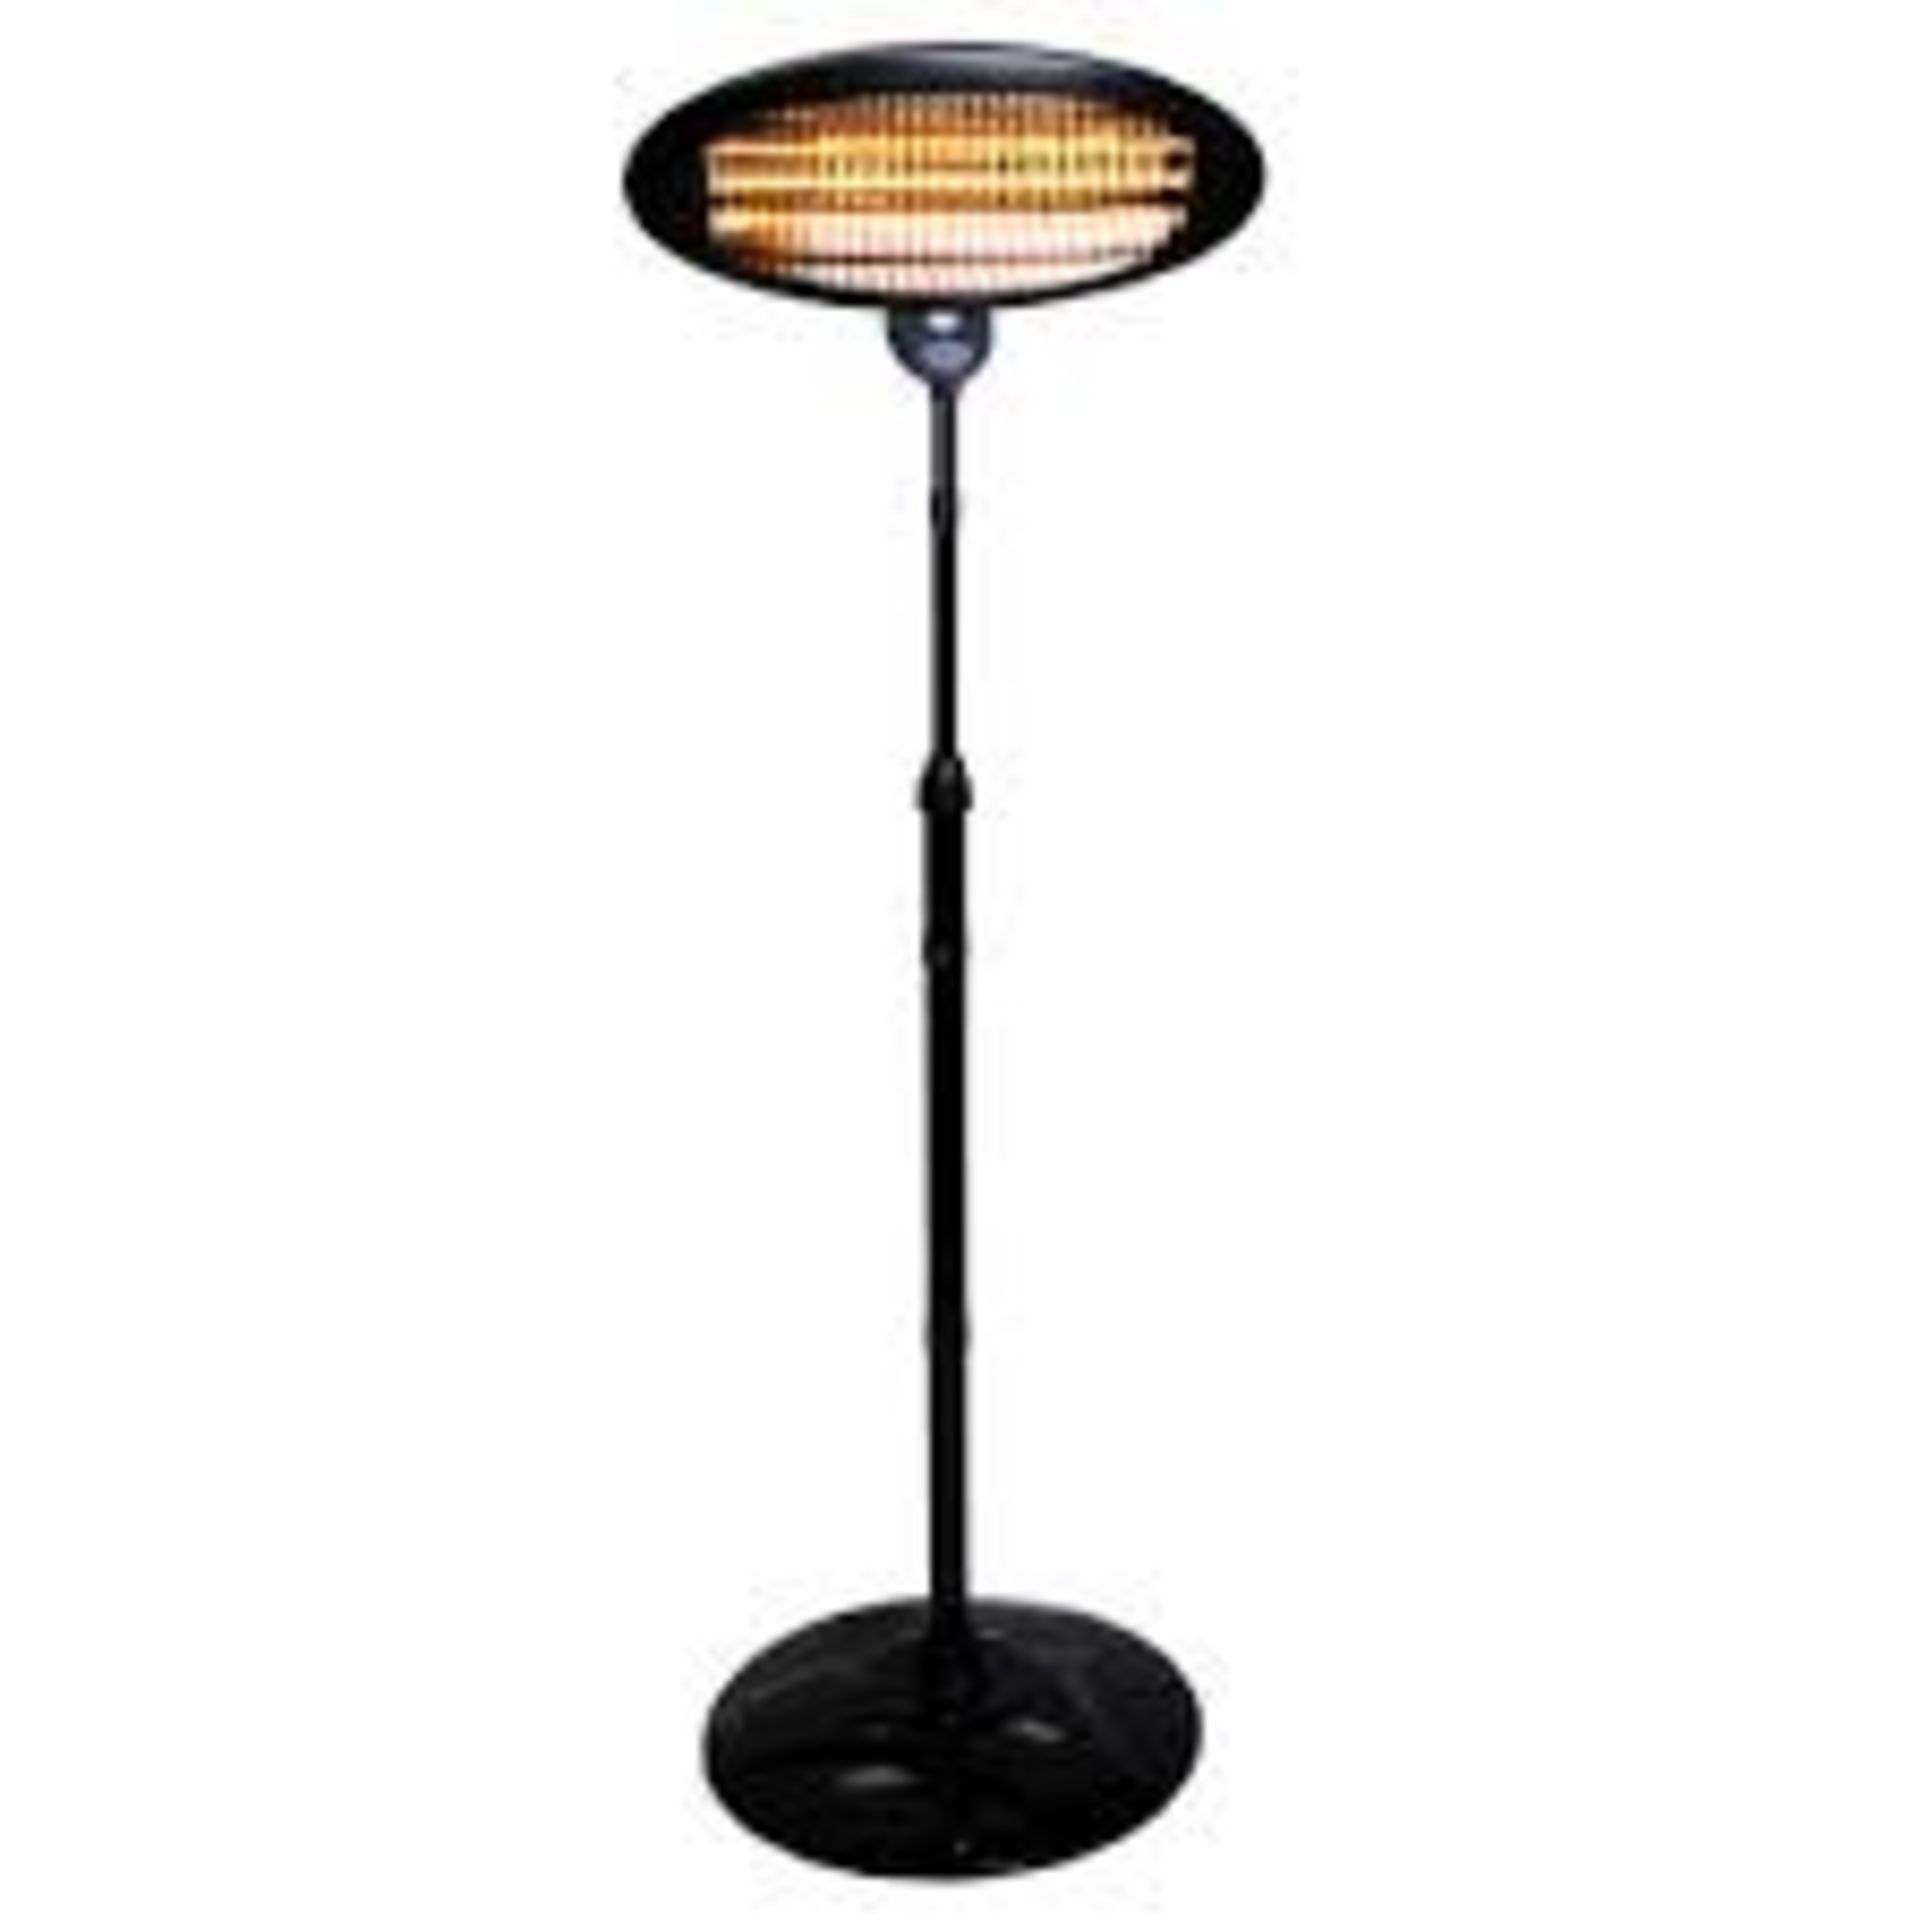 PALLET TO CONTAIN 10 X BRAND NEW ADJUSTABLE FREESTANDING OUTDOOR HALOGEN PATIO HEATER, ELECTRIC - Image 2 of 3